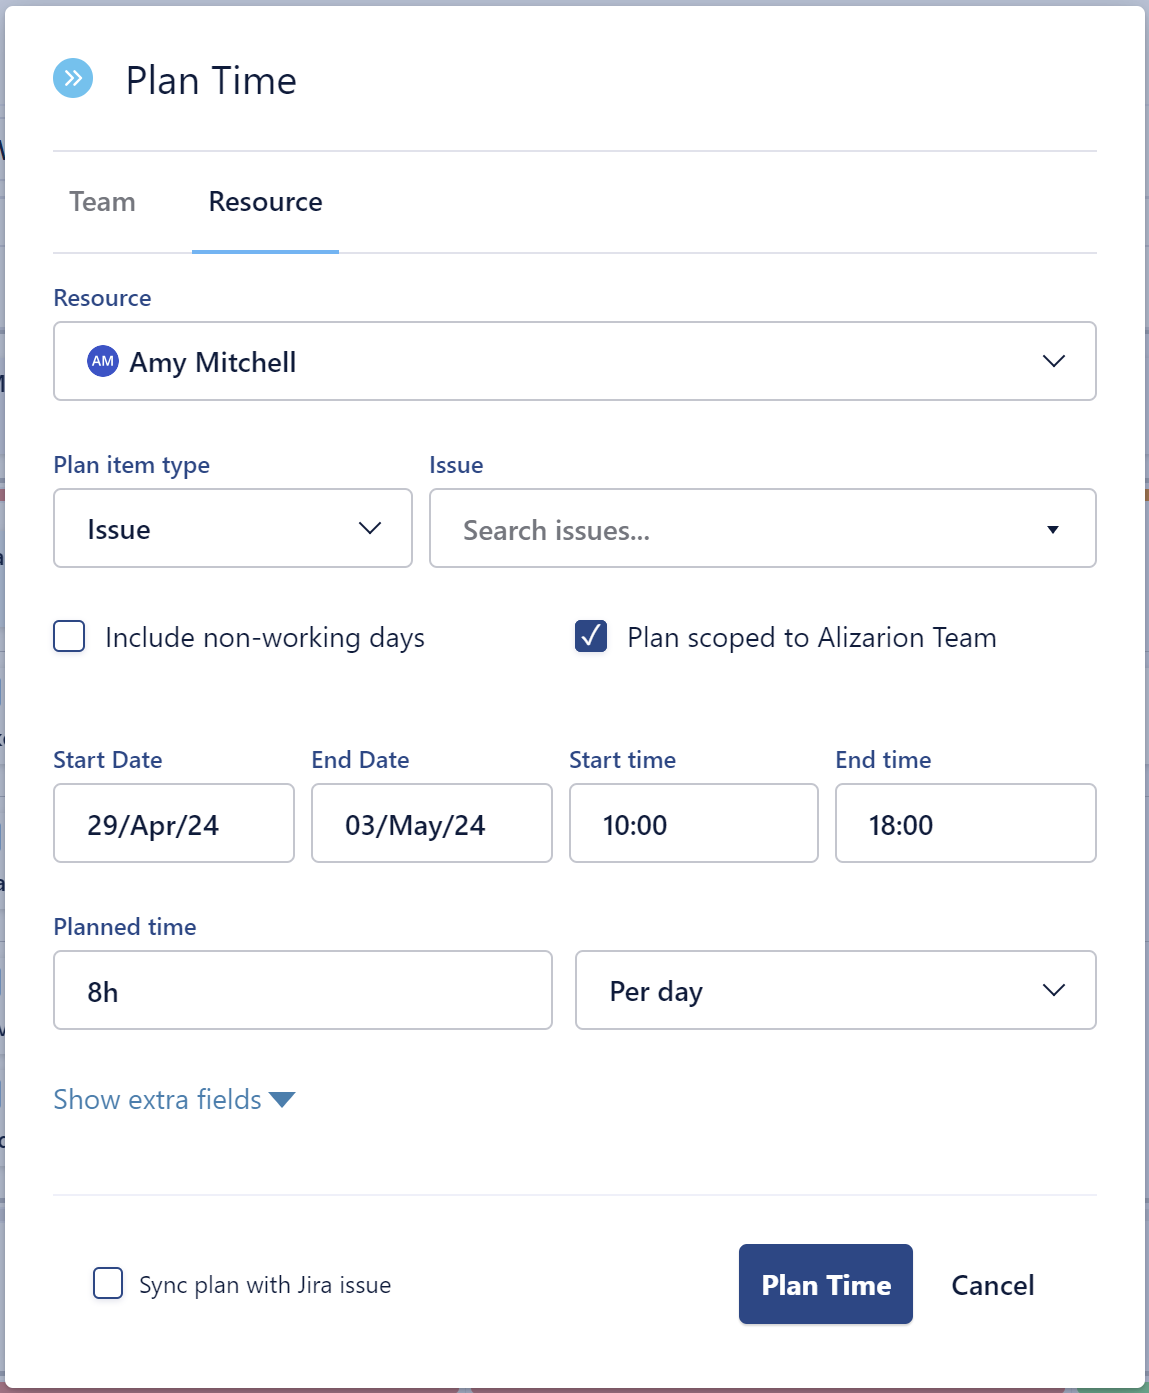 The plan time form with Sync Plan with Jira disabled